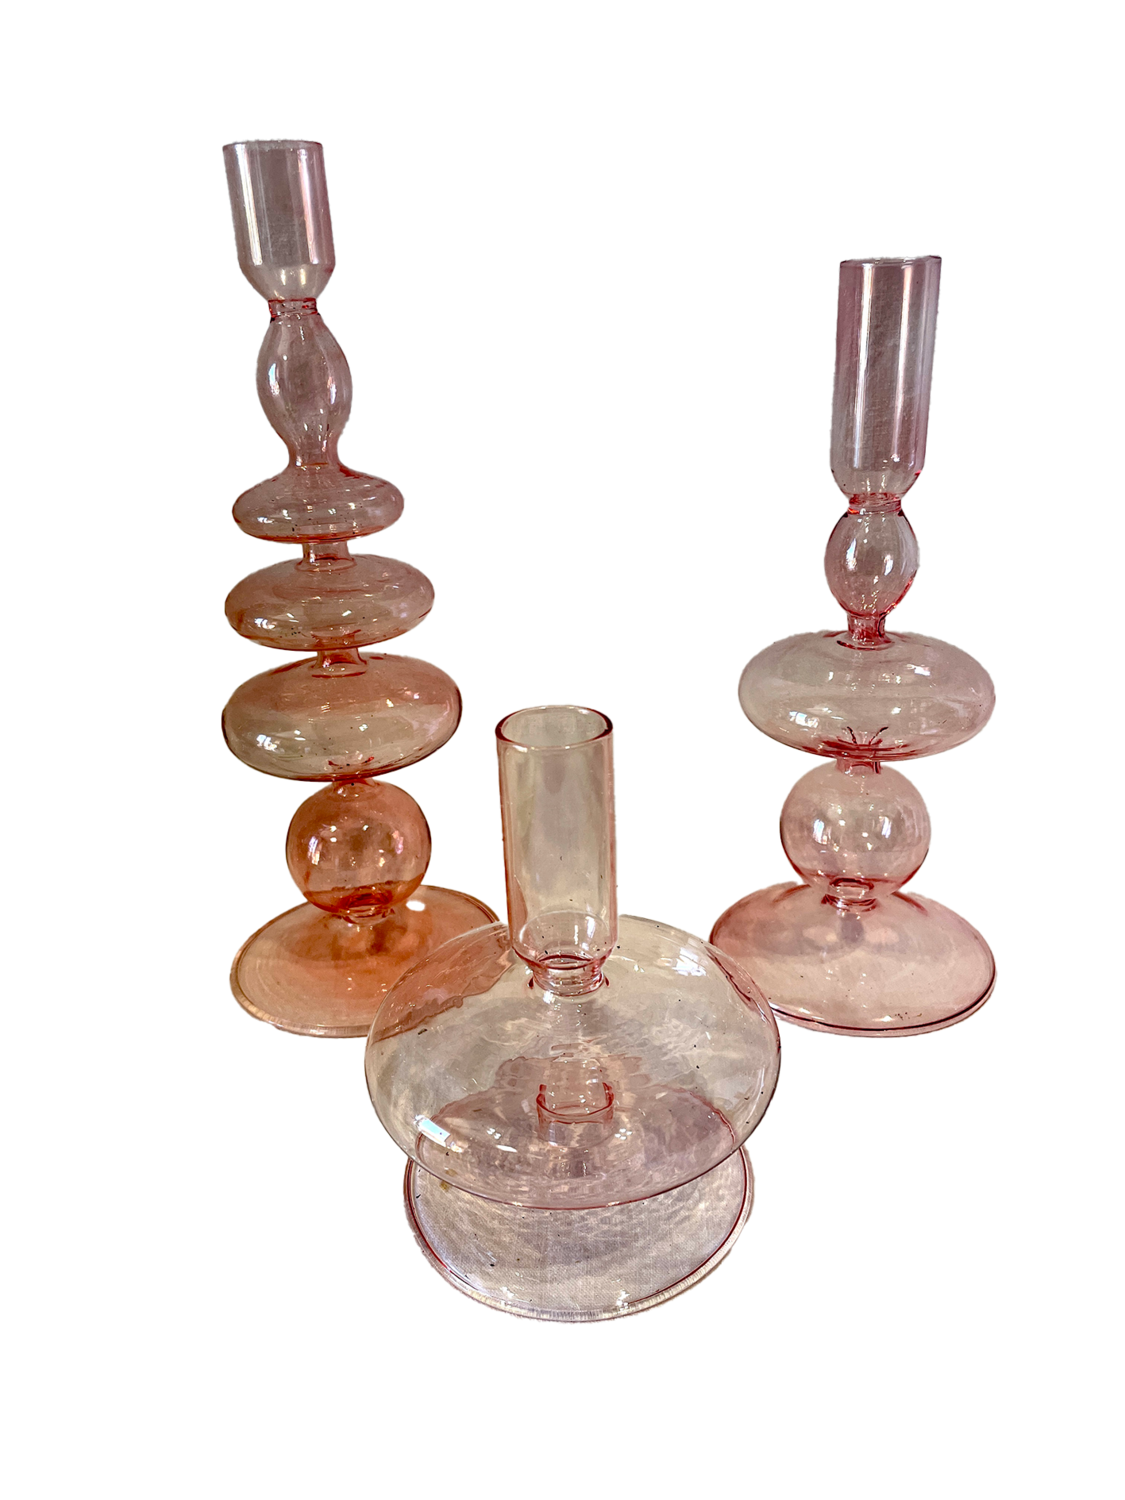 MUSE 1 - Bougeoirs rose- lot de 3